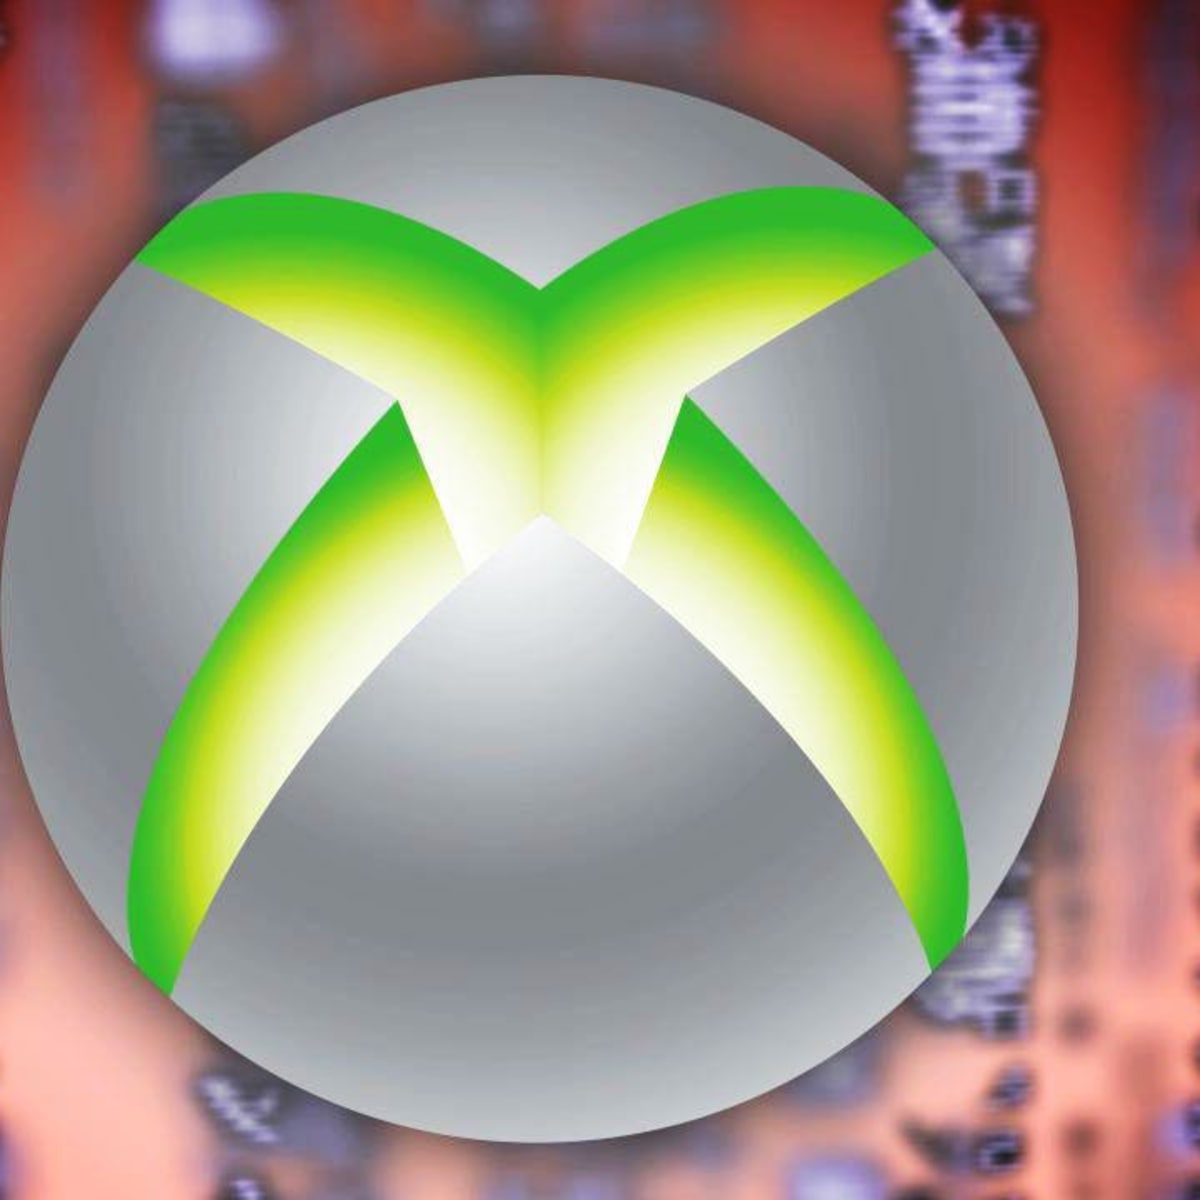 Xbox Compatible Video Formats & How to Play Video on Them